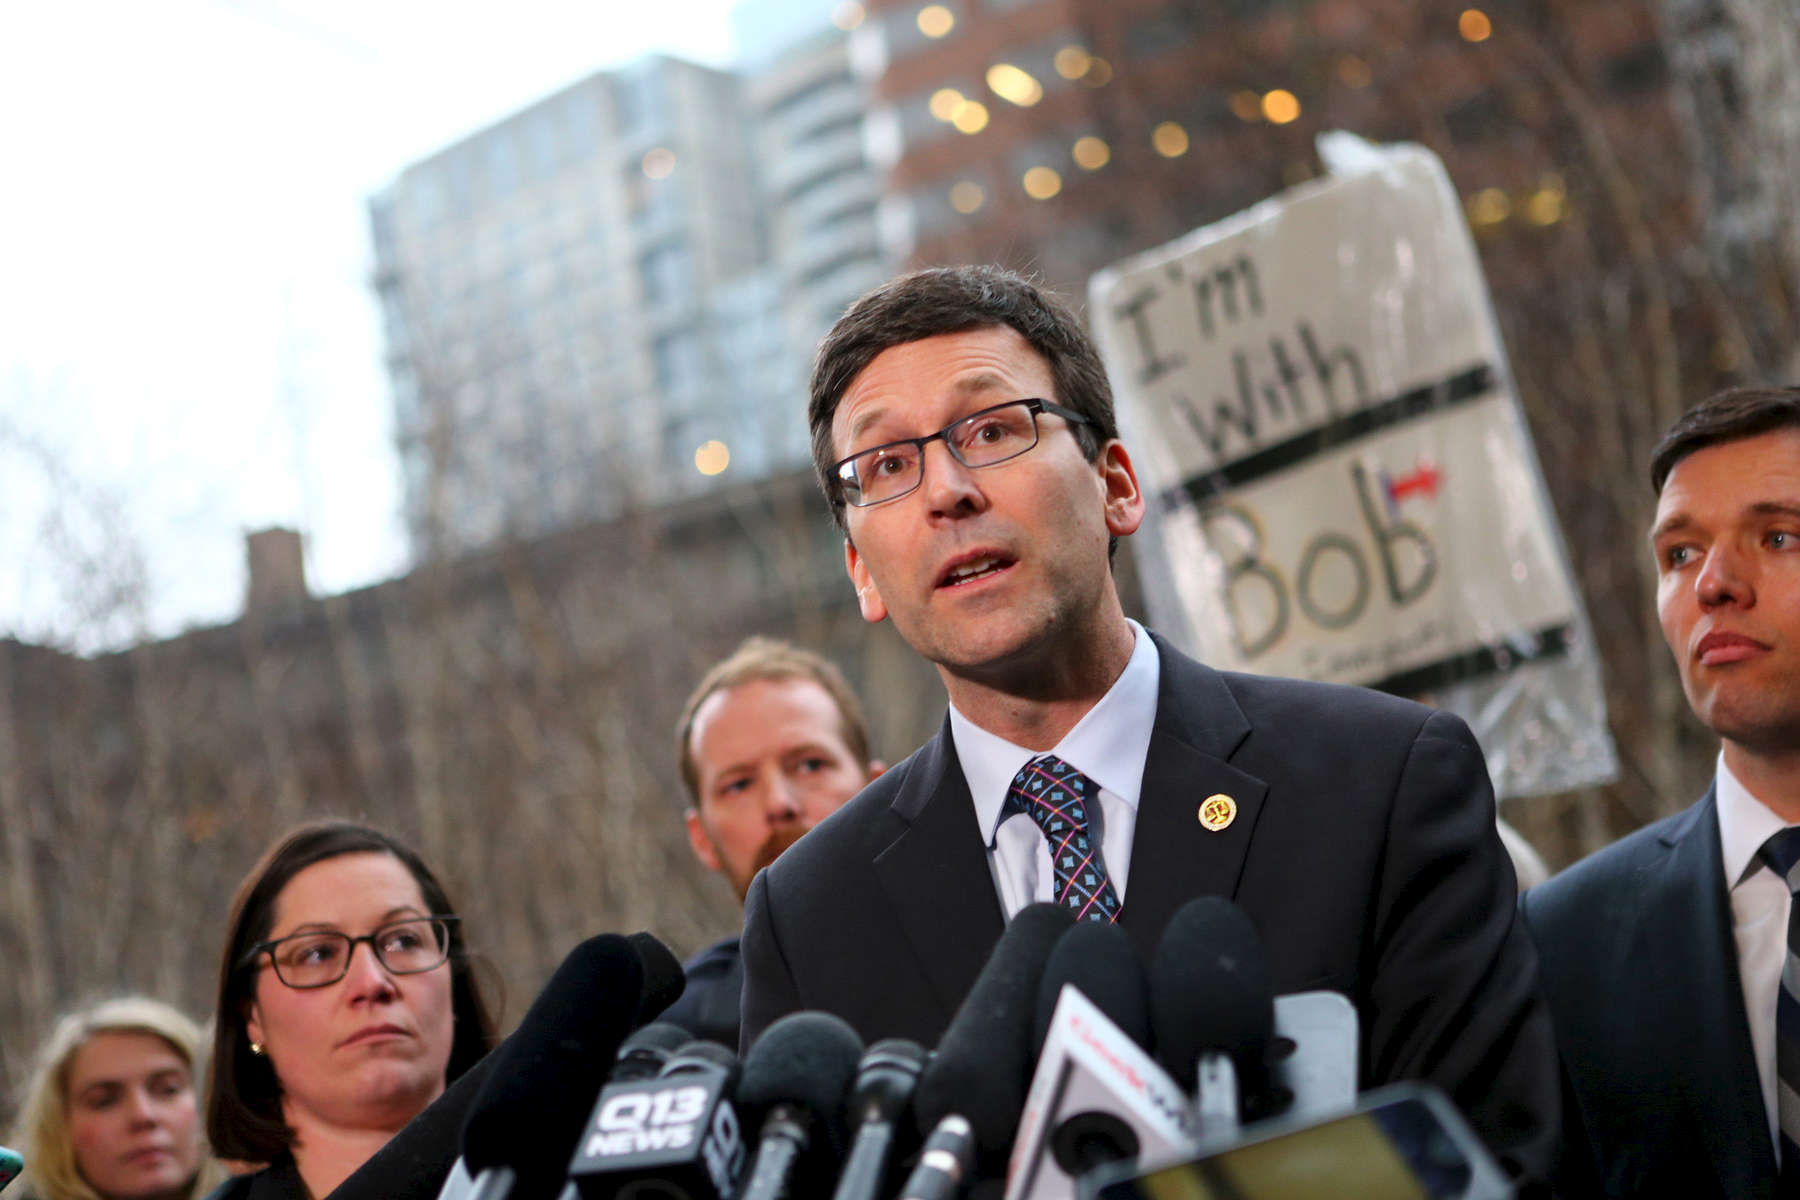 SEATTLE, WA - FEBRUARY 03: Washington state Attorney General Bob Ferguson speaks at a press conference outside U.S. District Court, Western Washington, on February 3, 2017 in Seattle, Washington. Ferguson filed a state lawsuit challenging key sections of President Trump’s immigration Executive Order as illegal and unconstitutional. (Photo by Karen Ducey/Getty Images)